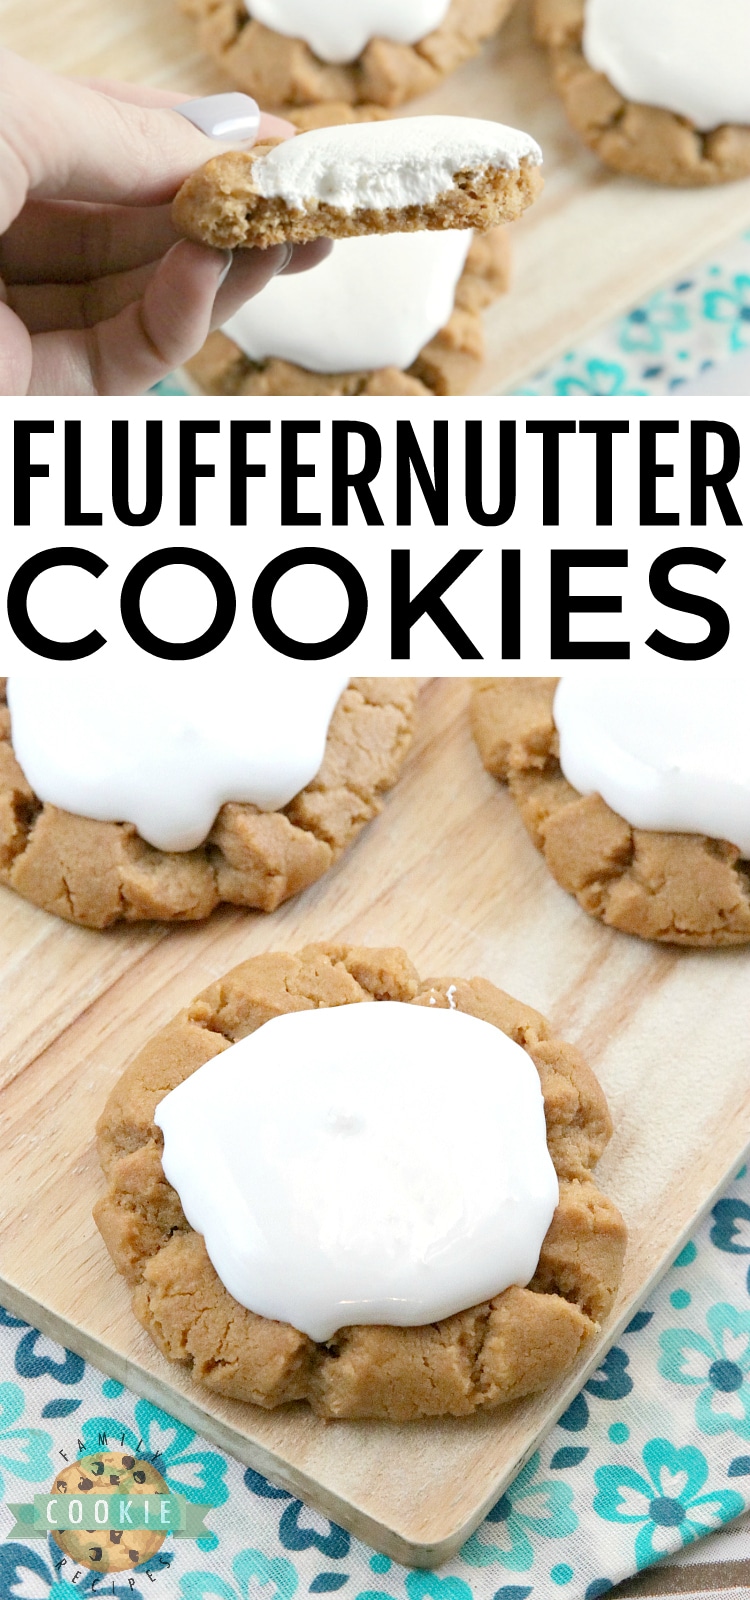 Fluffernutter Cookies take a traditional peanut butter cookie recipe to the next level by adding marshmallow fluff to the top! The peanut butter and marshmallow combination is absolutely amazing in this cookie recipe! via @buttergirls